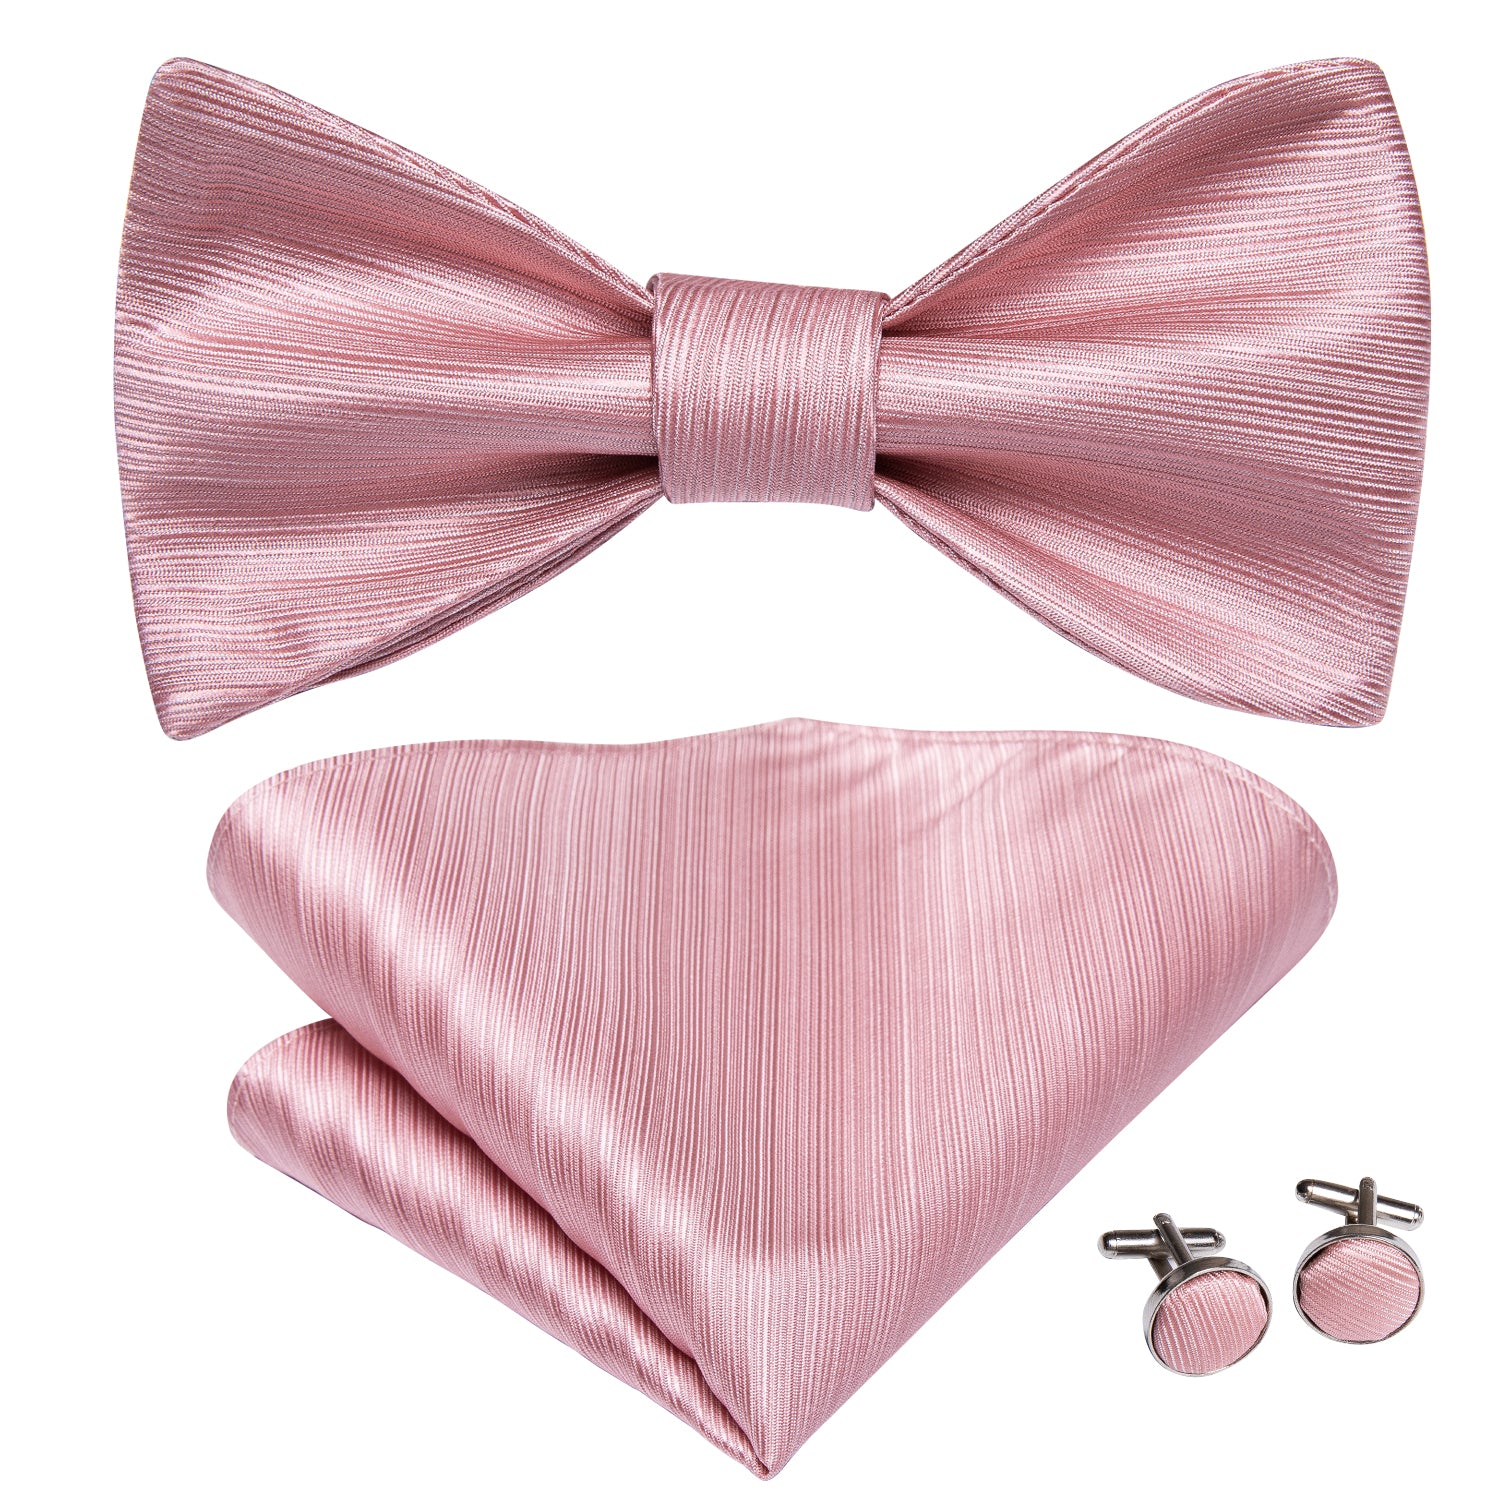 Pink Solid Self-tied Bow Tie Pocket Square Cufflinks Set